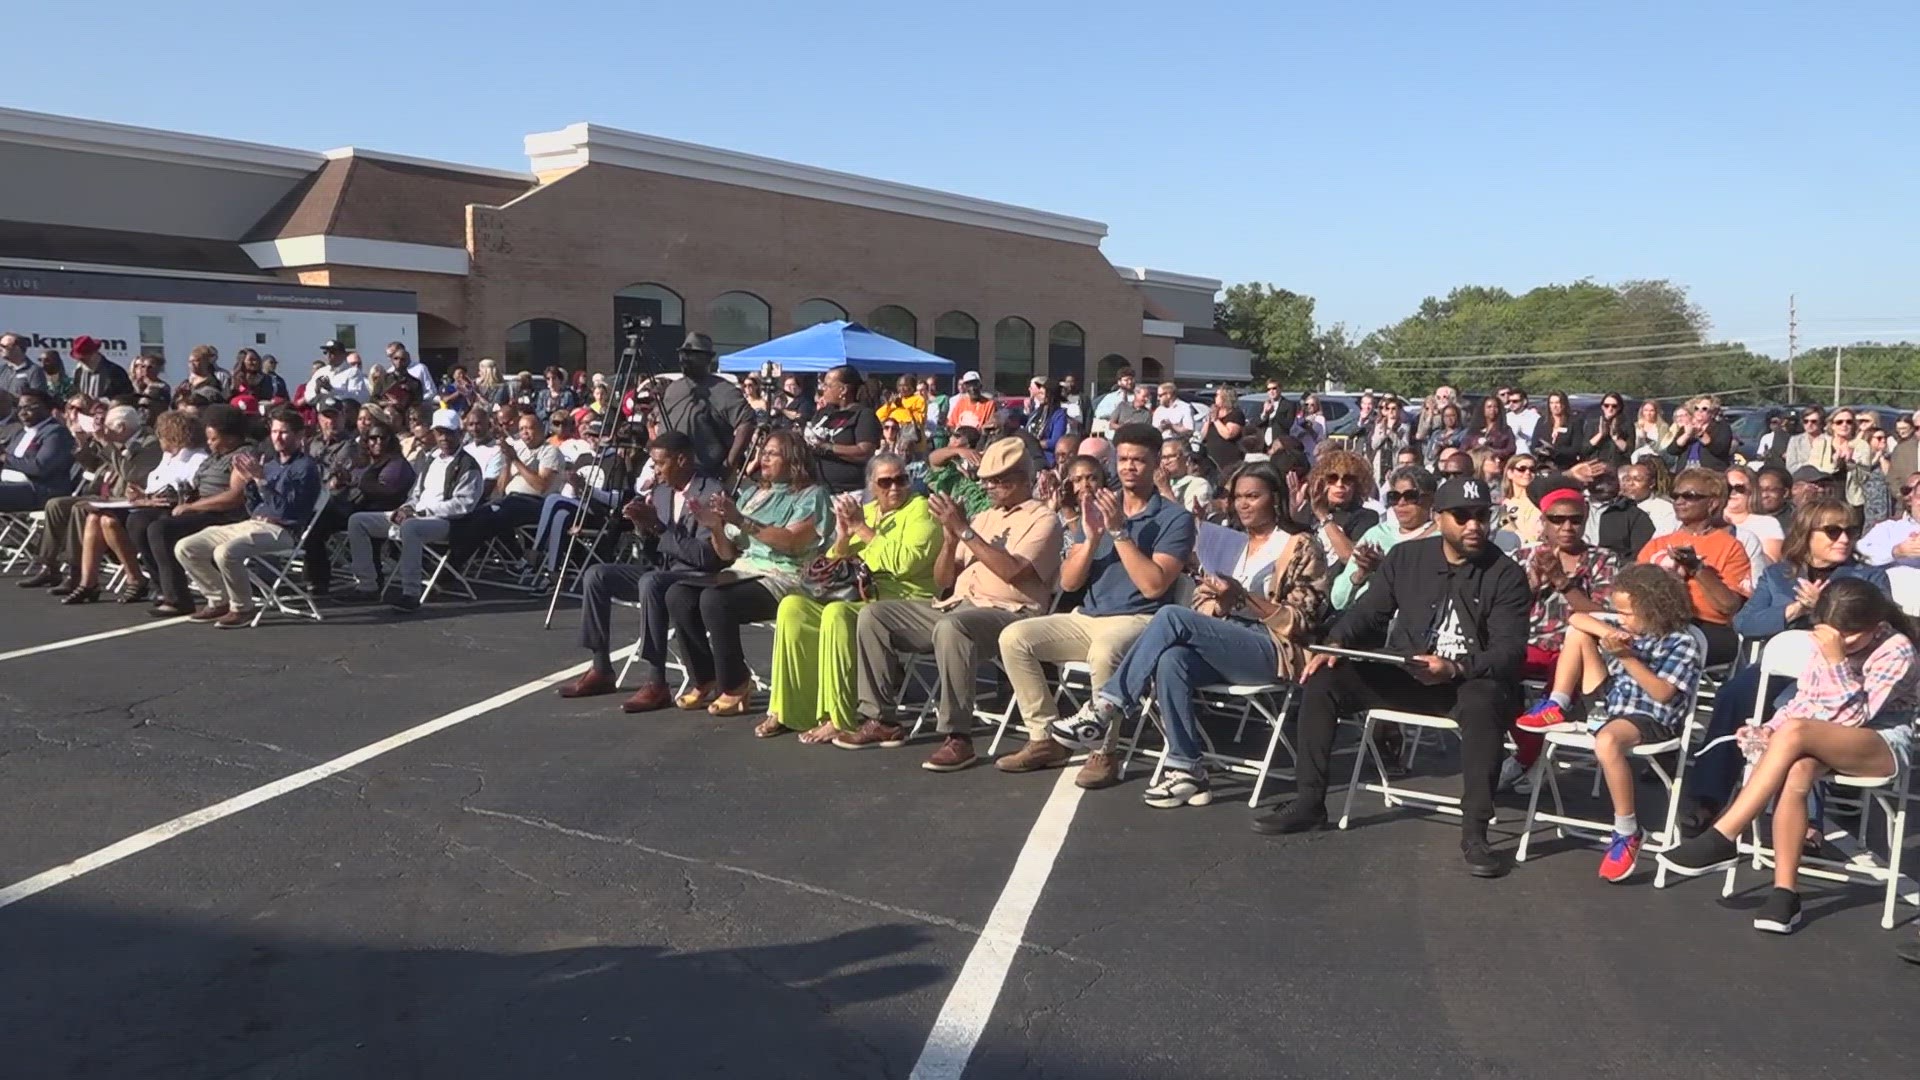 The community economic hub opened Tuesday on Florissant Avenue. The marketplace is a $20 million investment and will employ 56 people.